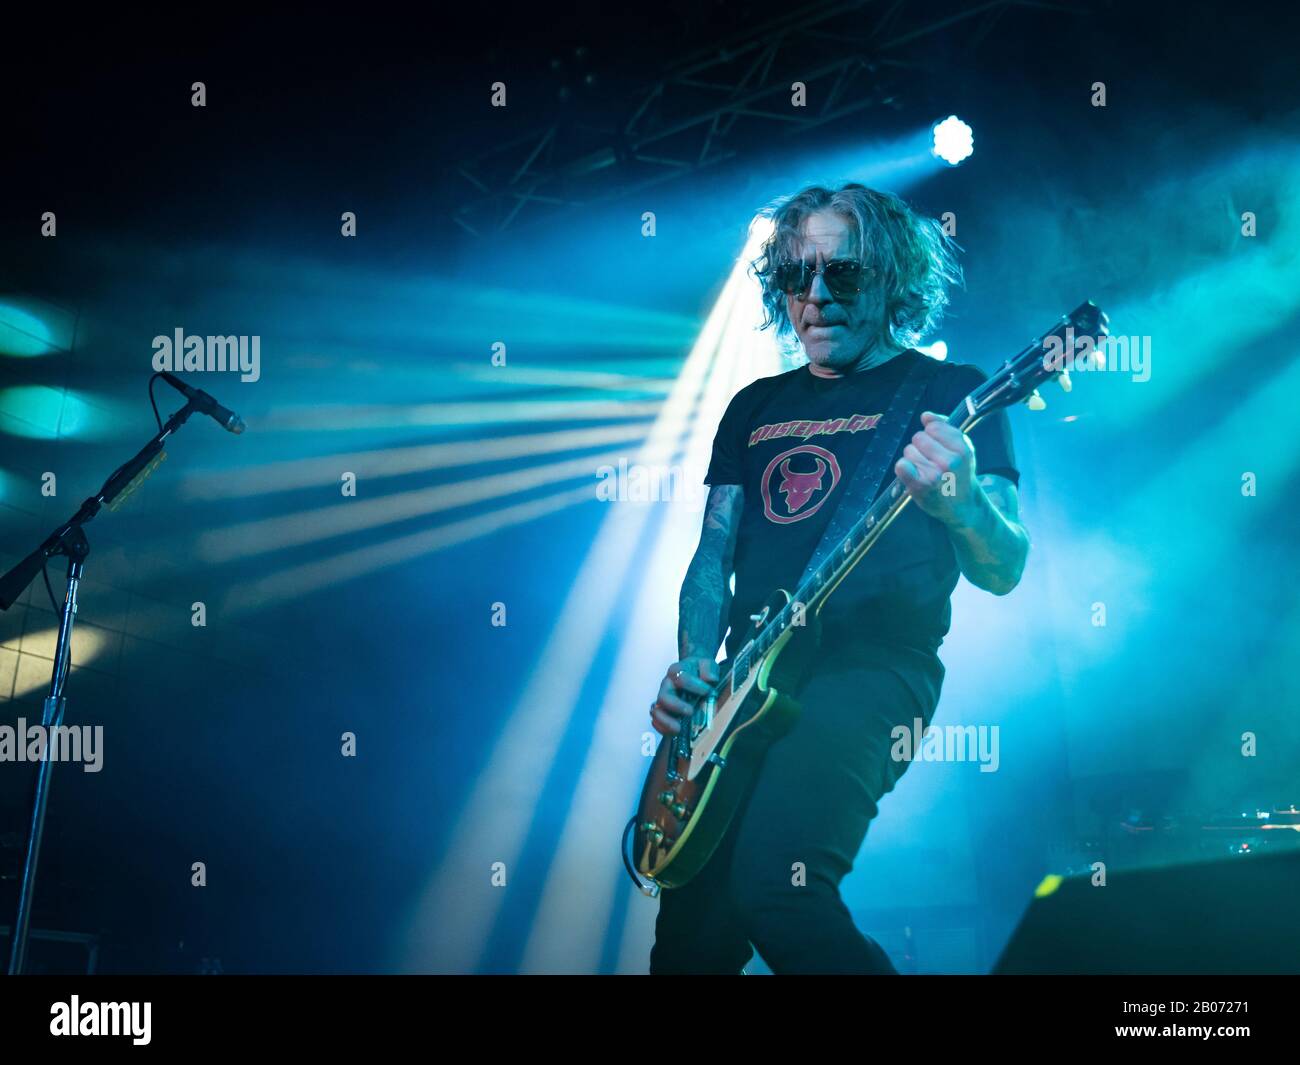 Milan, Italy. 18 February 2020. American stoner rock band MONSTER MAGNET performs at LIVE MUSIC CLUB. Brambilla Simone Photography Live News Stock Photo